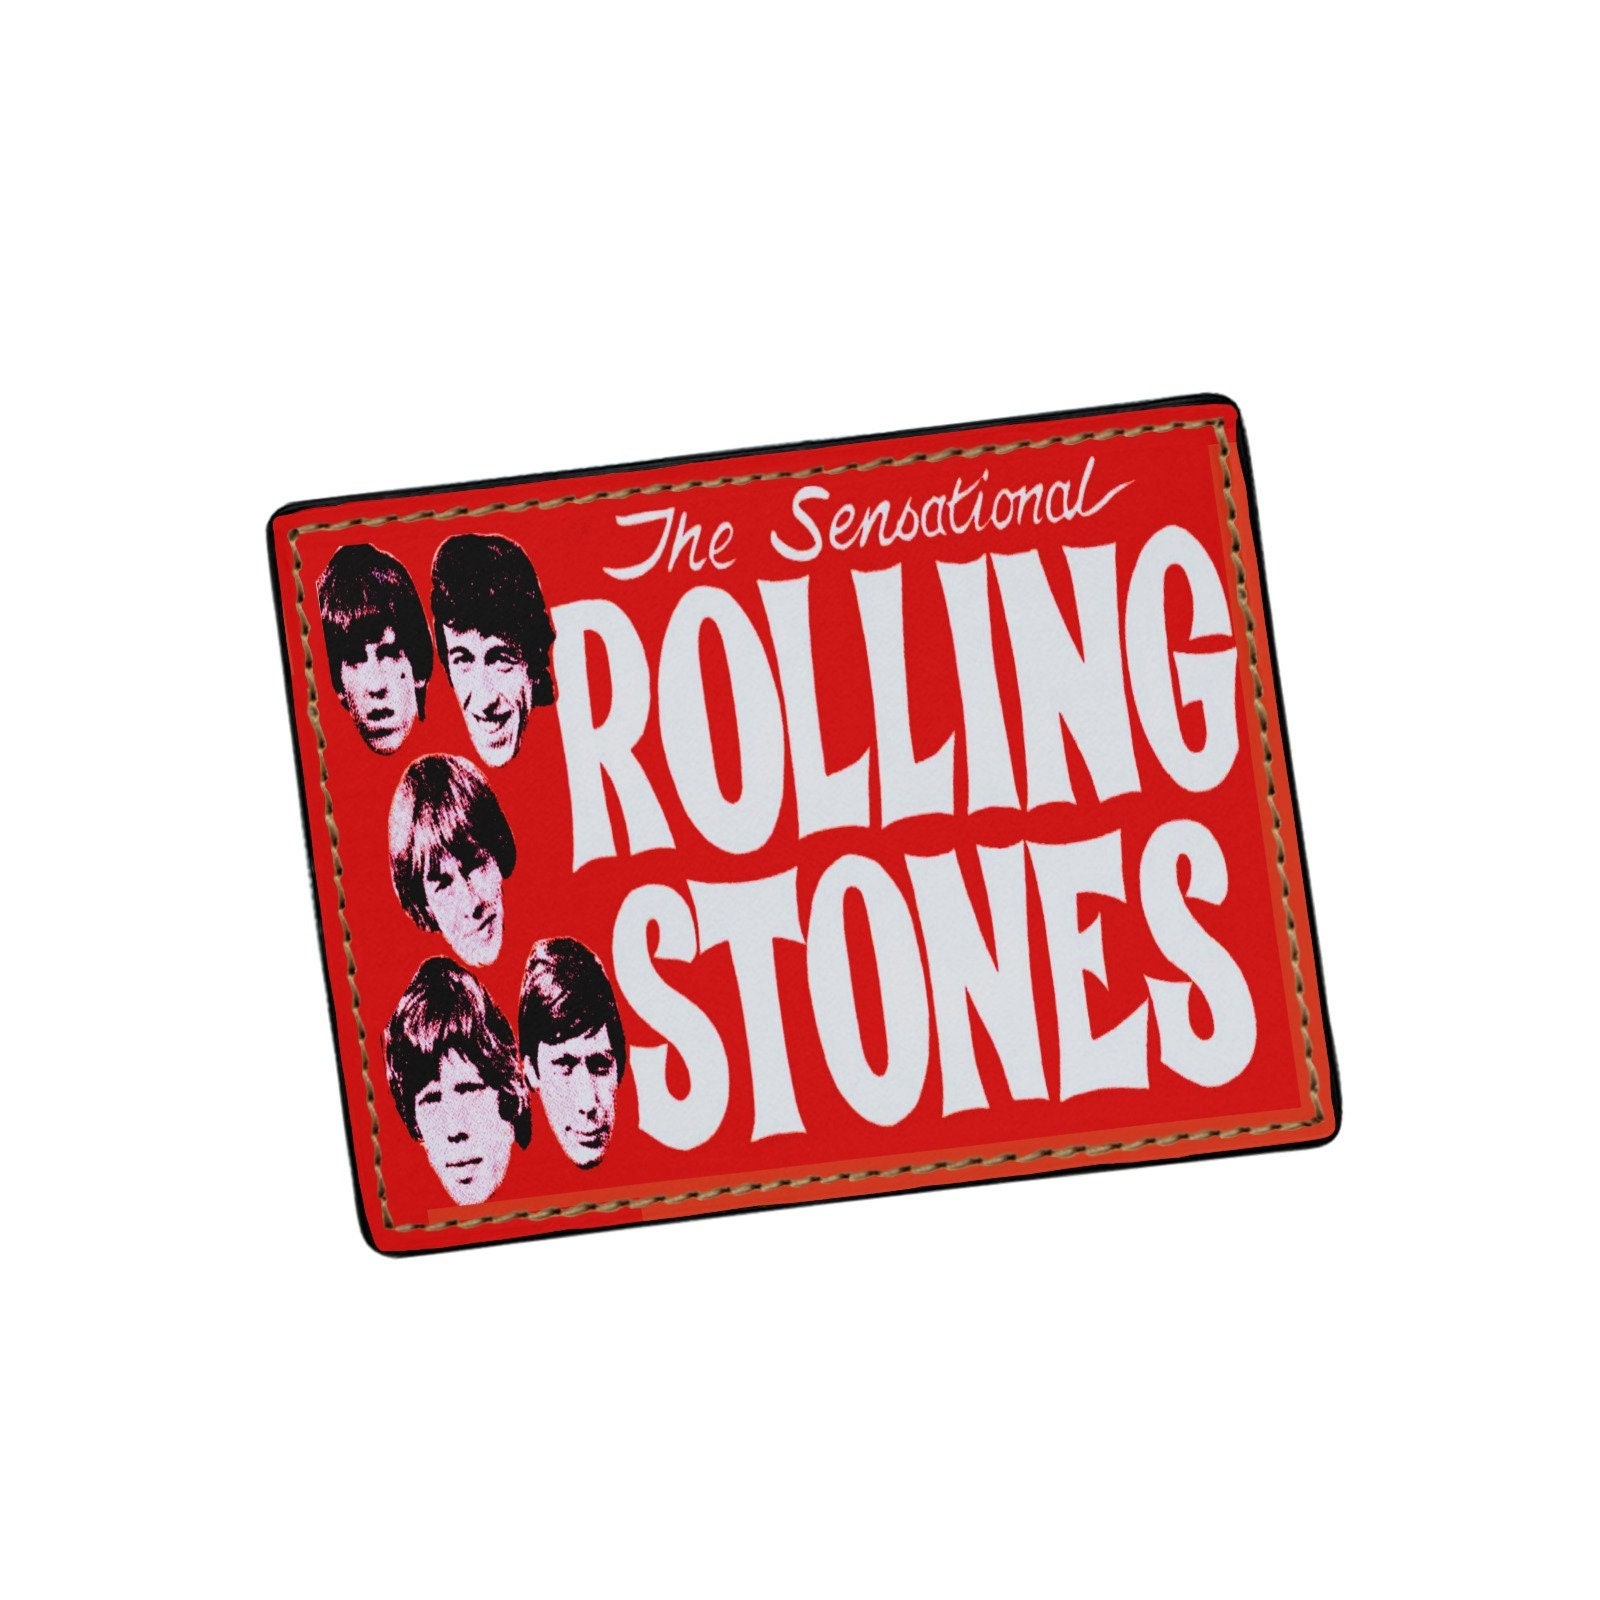 Rolling Stones “Undercover” vinyl record purse — She’s A Rainbow